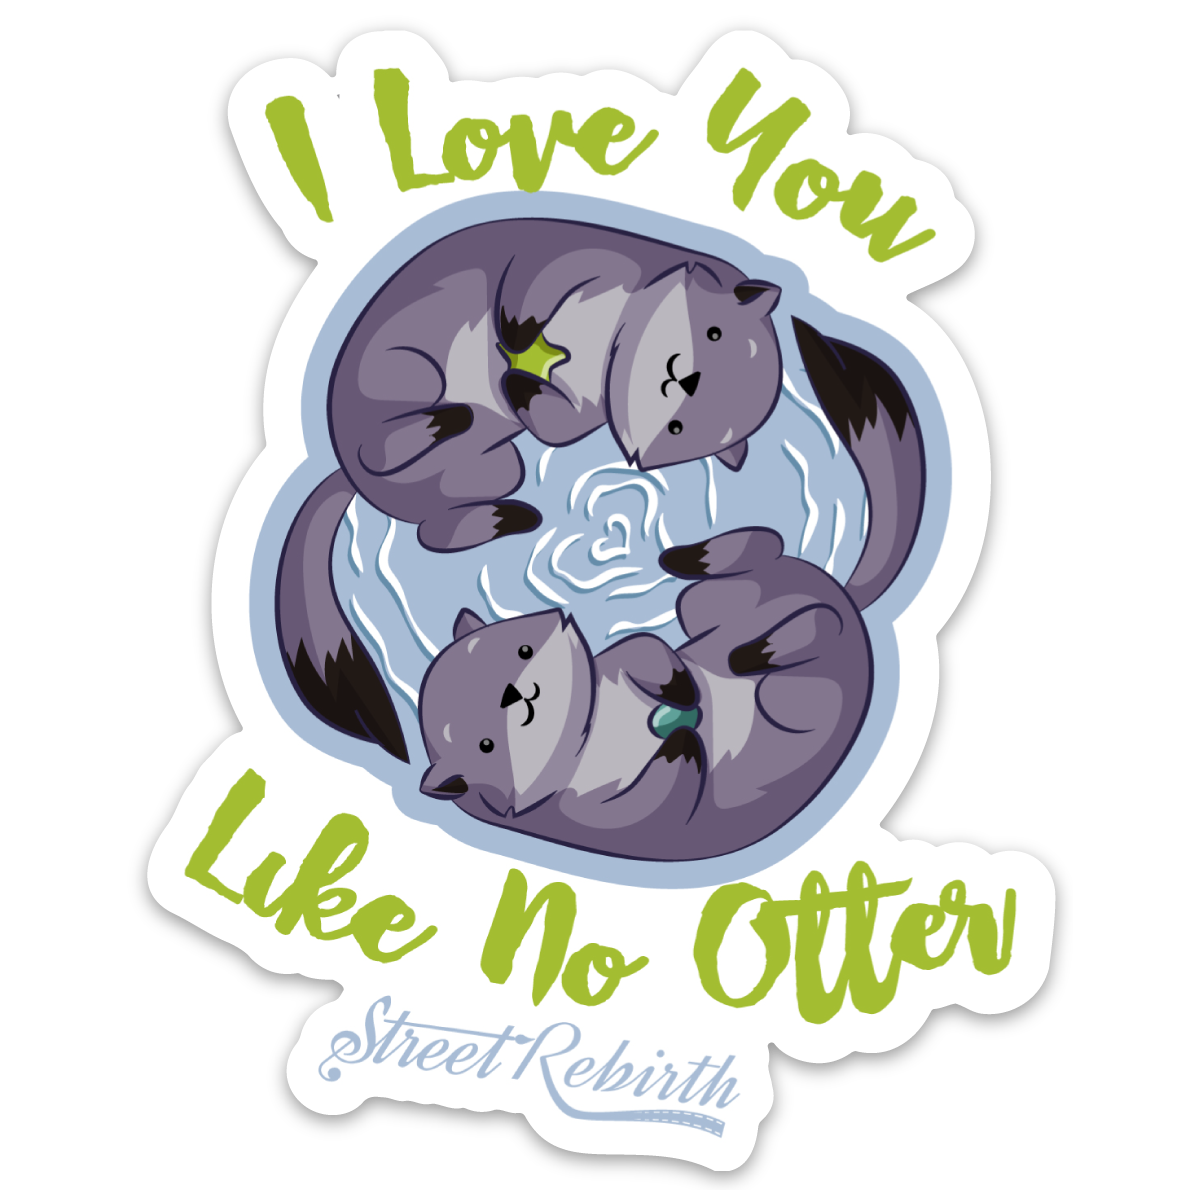 I LOVE YOU LIKE NO OTHER STICKER – ONE 4 INCH WATER PROOF VINYL STICKER – FOR HYDRO FLASK, SKATEBOARD, LAPTOP, PLANNER, CAR, COLLECTING, GIFTING